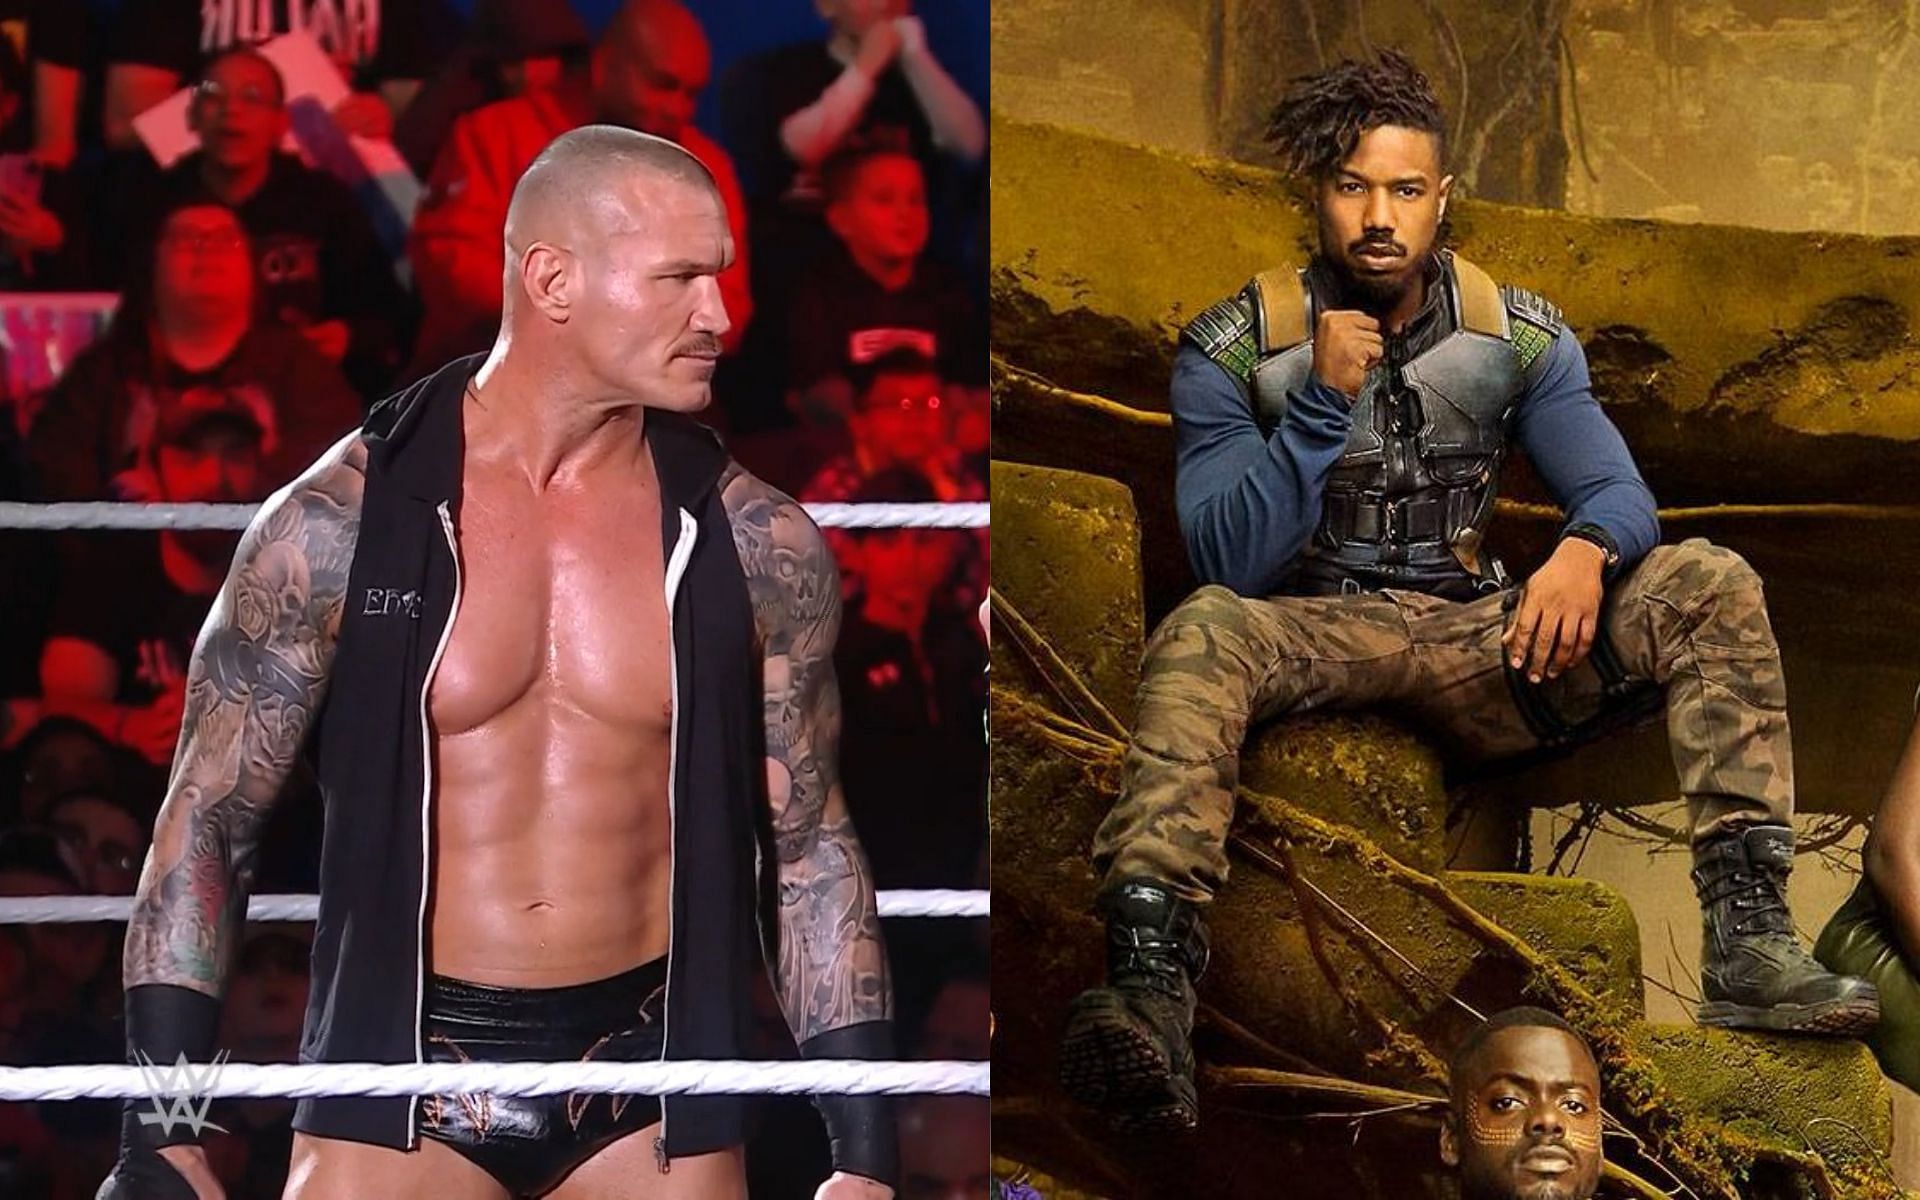 Randy Orton and Killmonger both have the capability of being better, but mostly choose not to